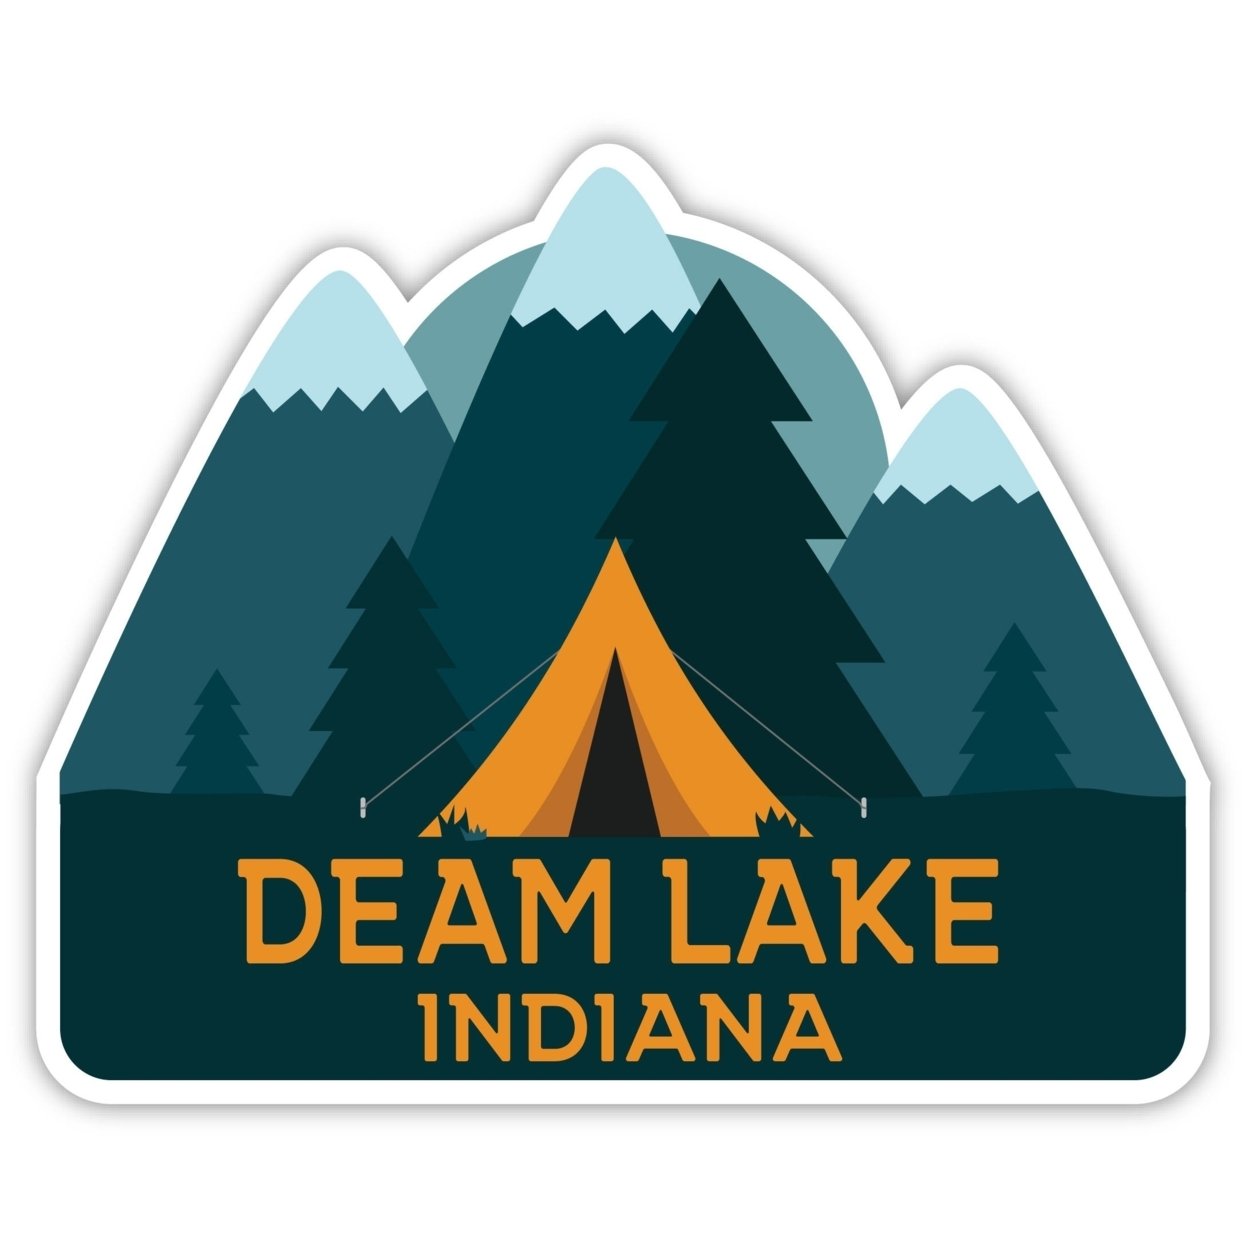 Deam Lake Indiana Souvenir Decorative Stickers (Choose Theme And Size) - 4-Pack, 10-Inch, Tent